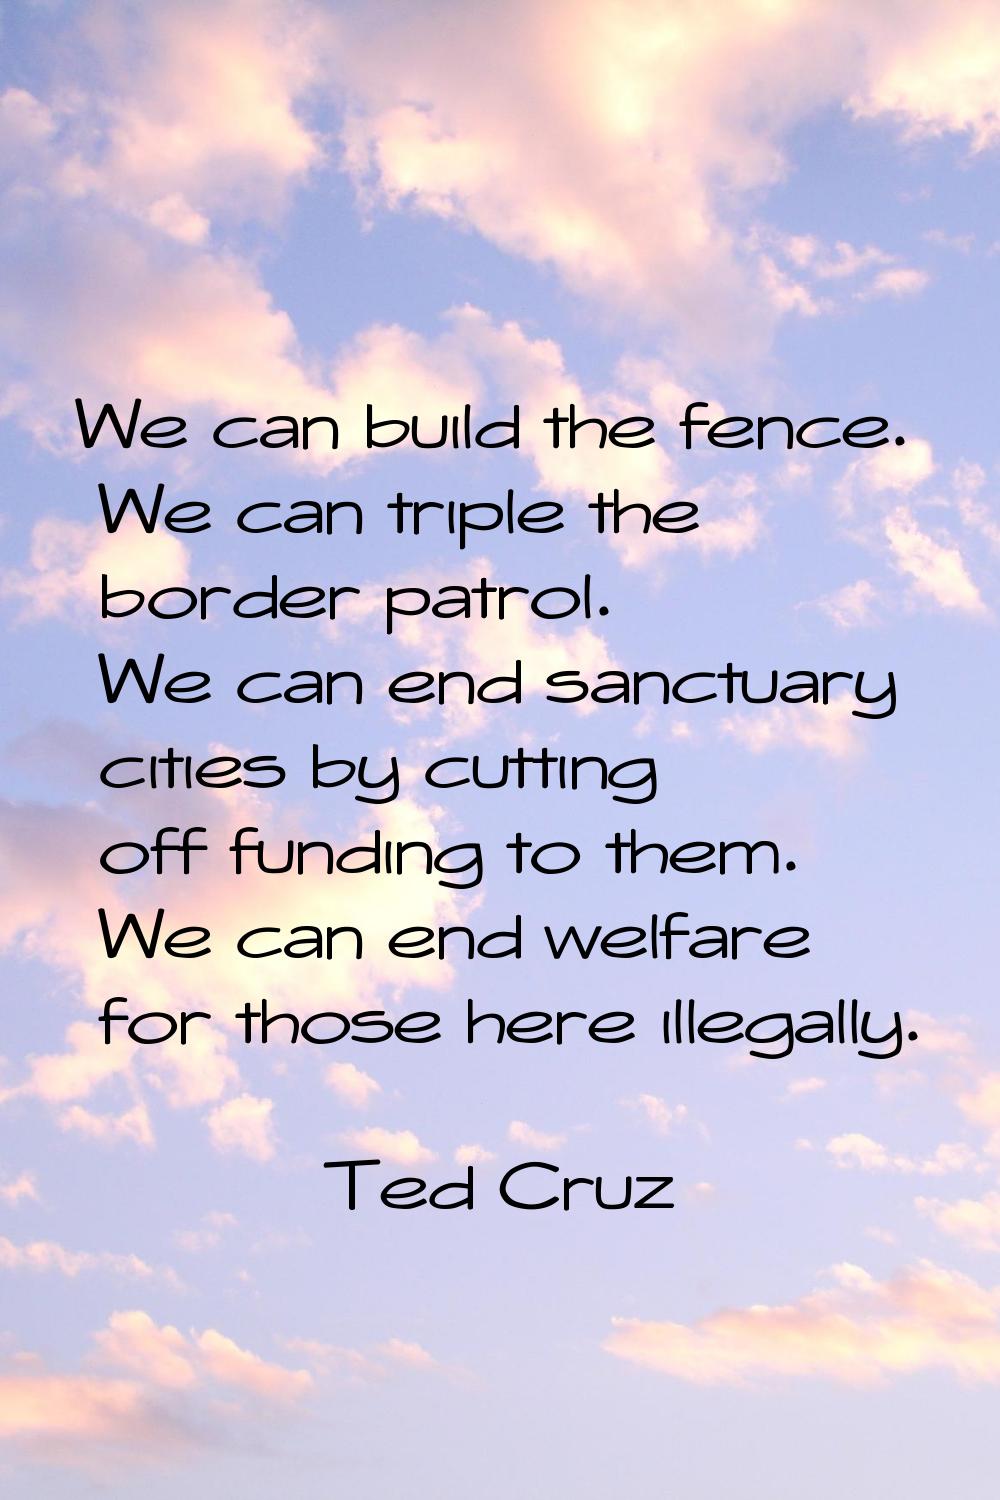 We can build the fence. We can triple the border patrol. We can end sanctuary cities by cutting off